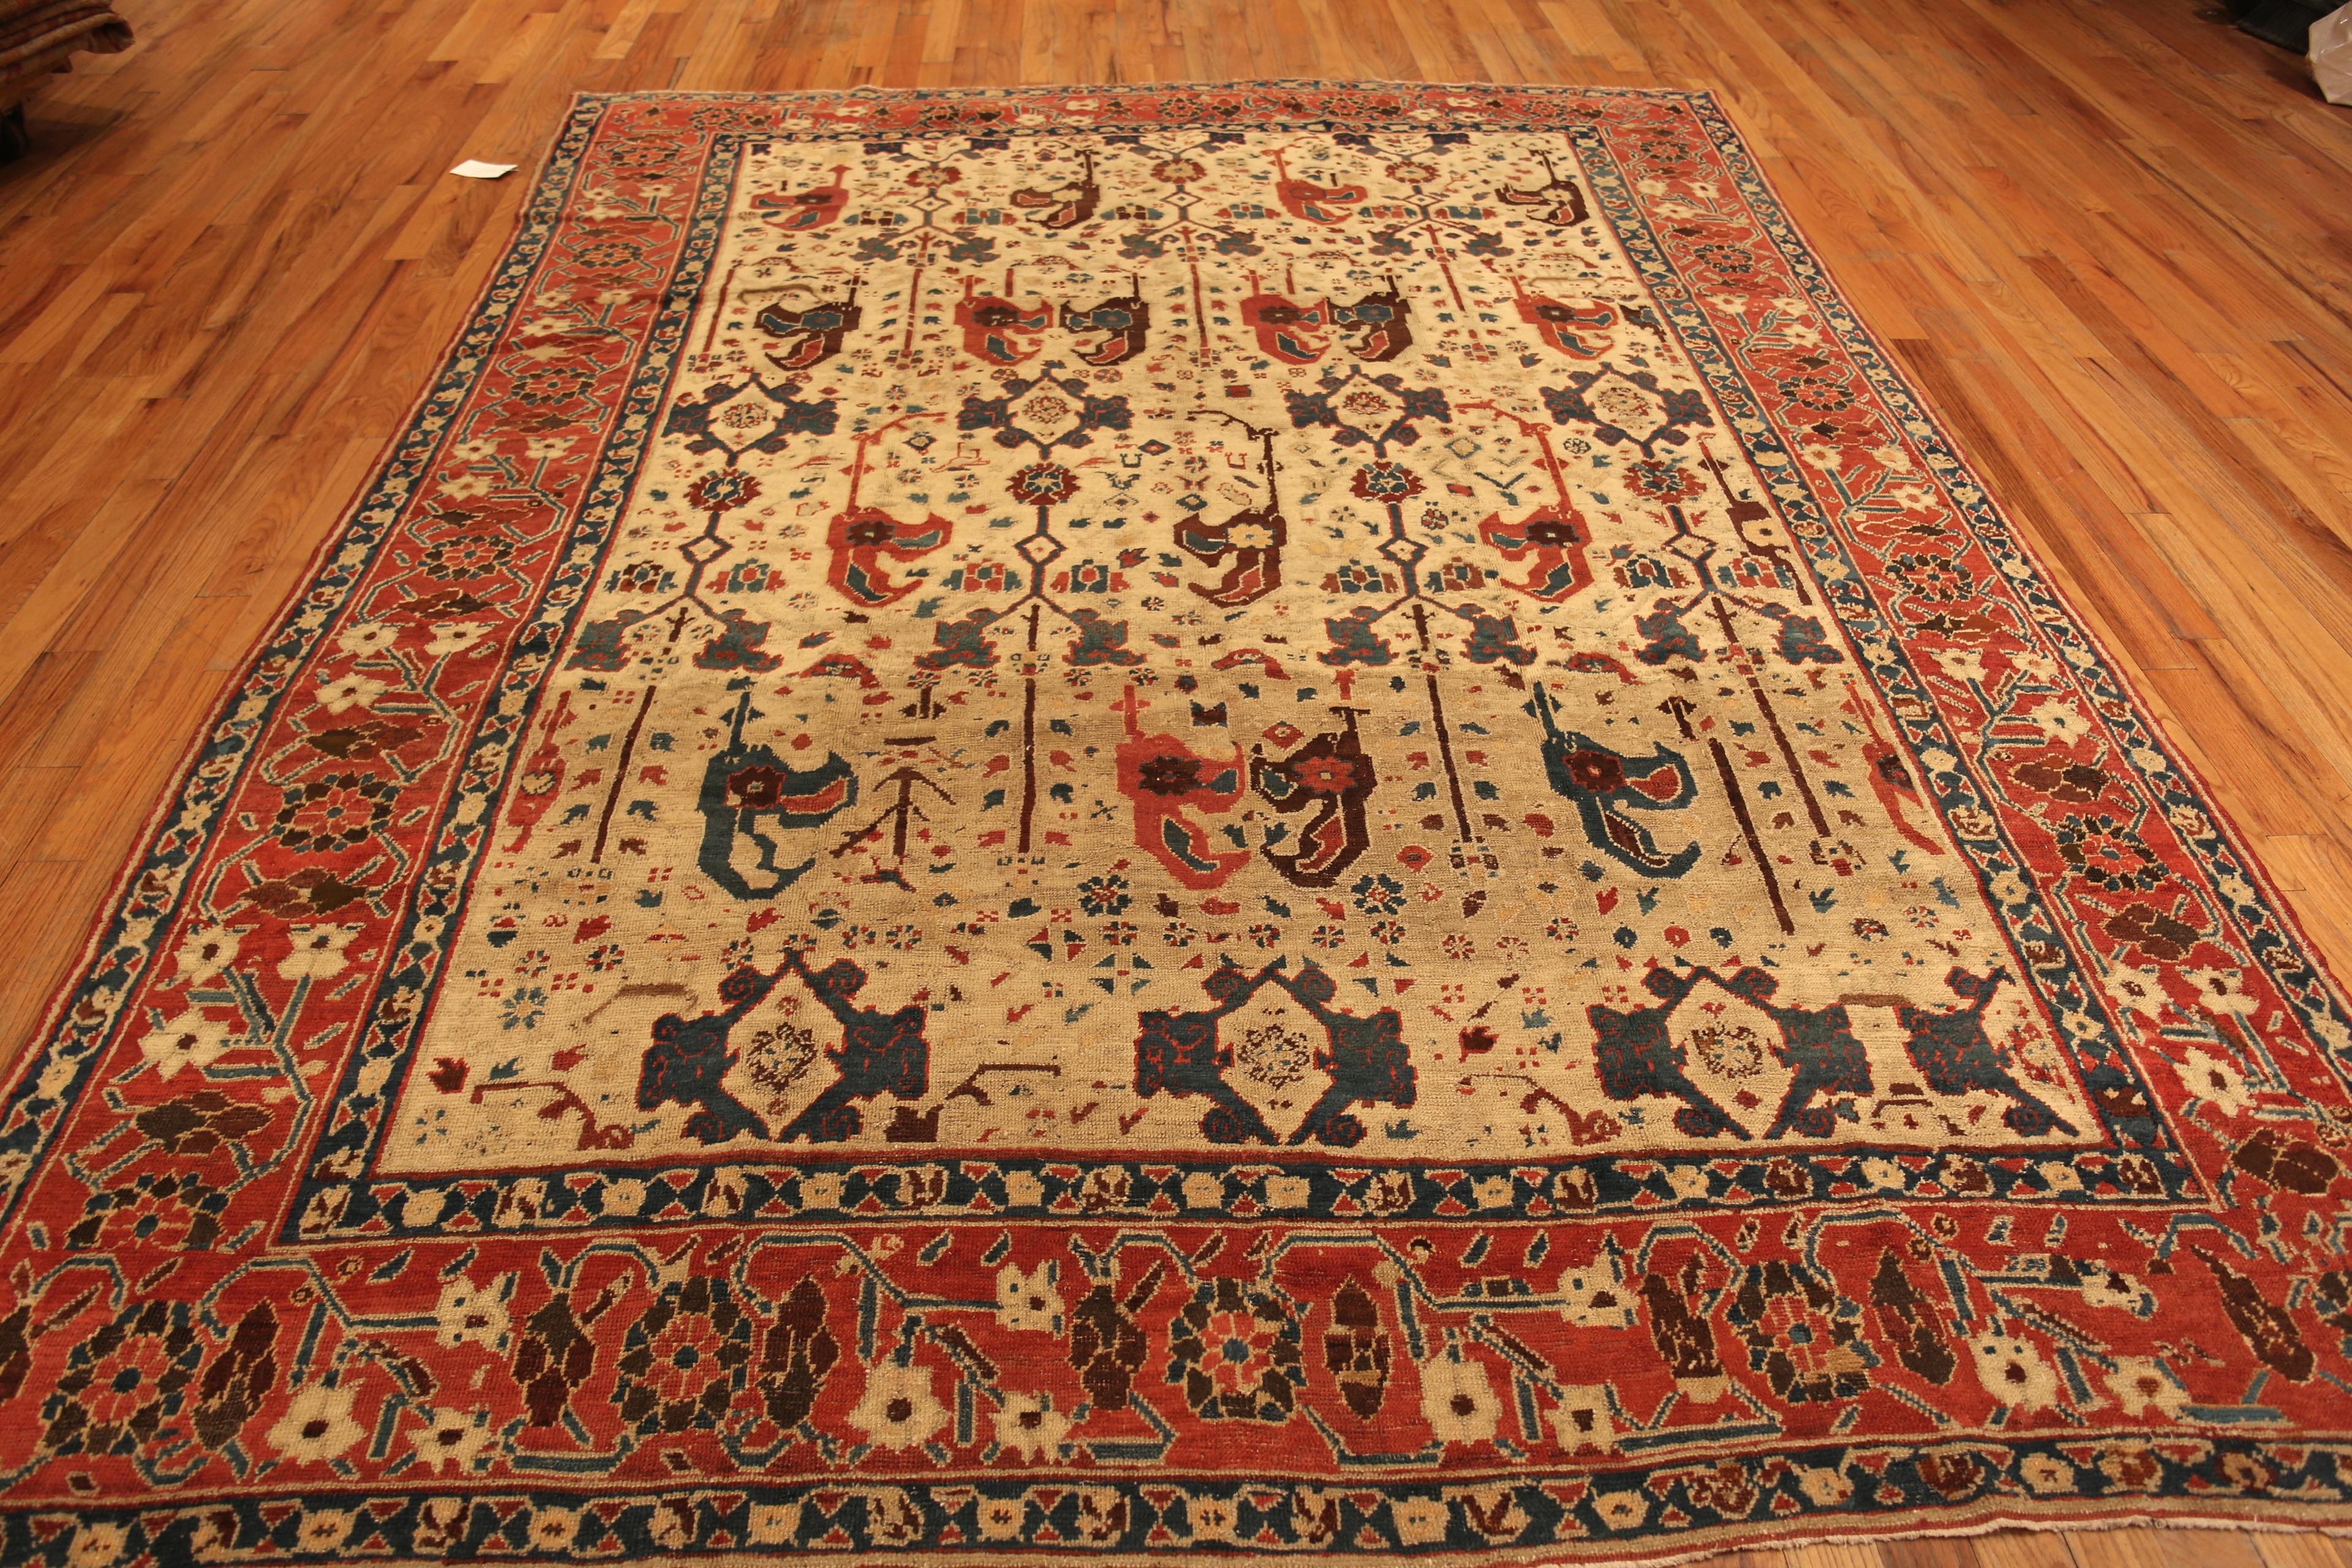 Rustic Ivory All Over Antique Tribal Persian Bakshaish Rug, Country of Origin: Persia, Circa date: 1880. Size: 8 ft 8 in x 11 ft 3 in (2.64 m x 3.43 m)